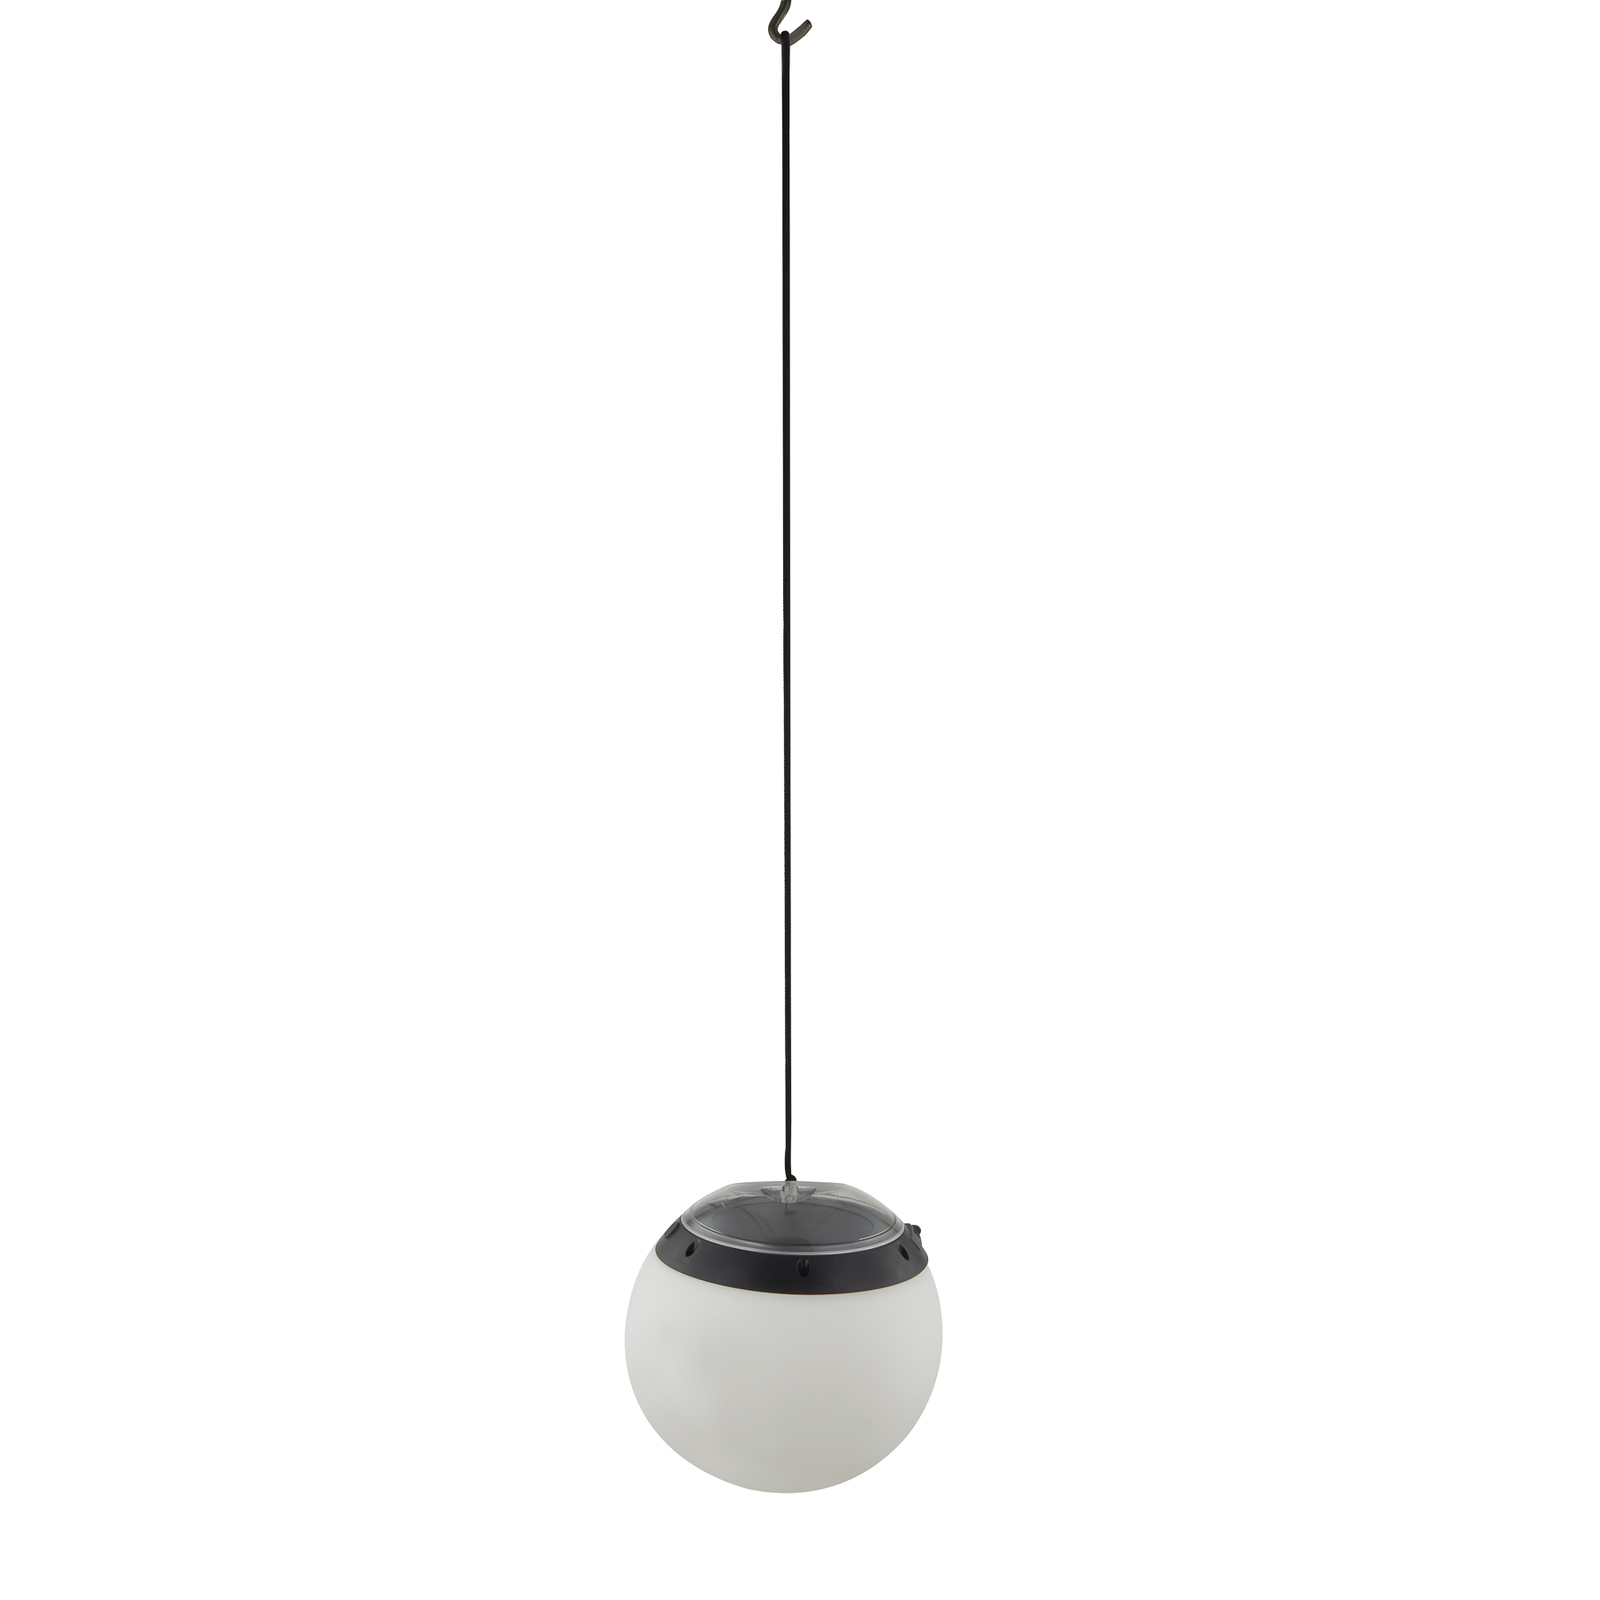 Lindby LED outdoor hanging light Eleia, RGBW, 20 cm, rechargeable battery